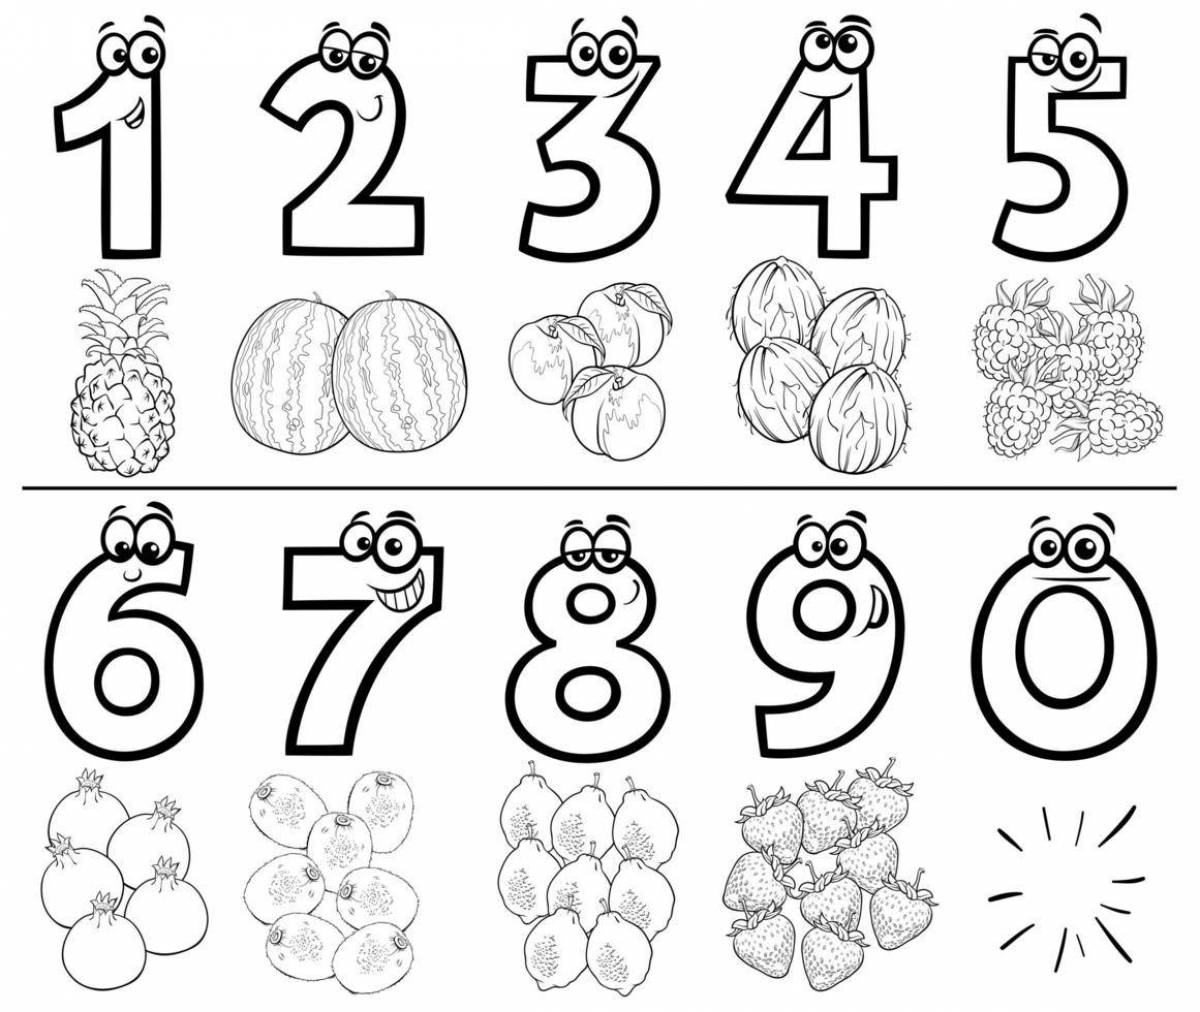 Bright coloring numbers from 1 to 10